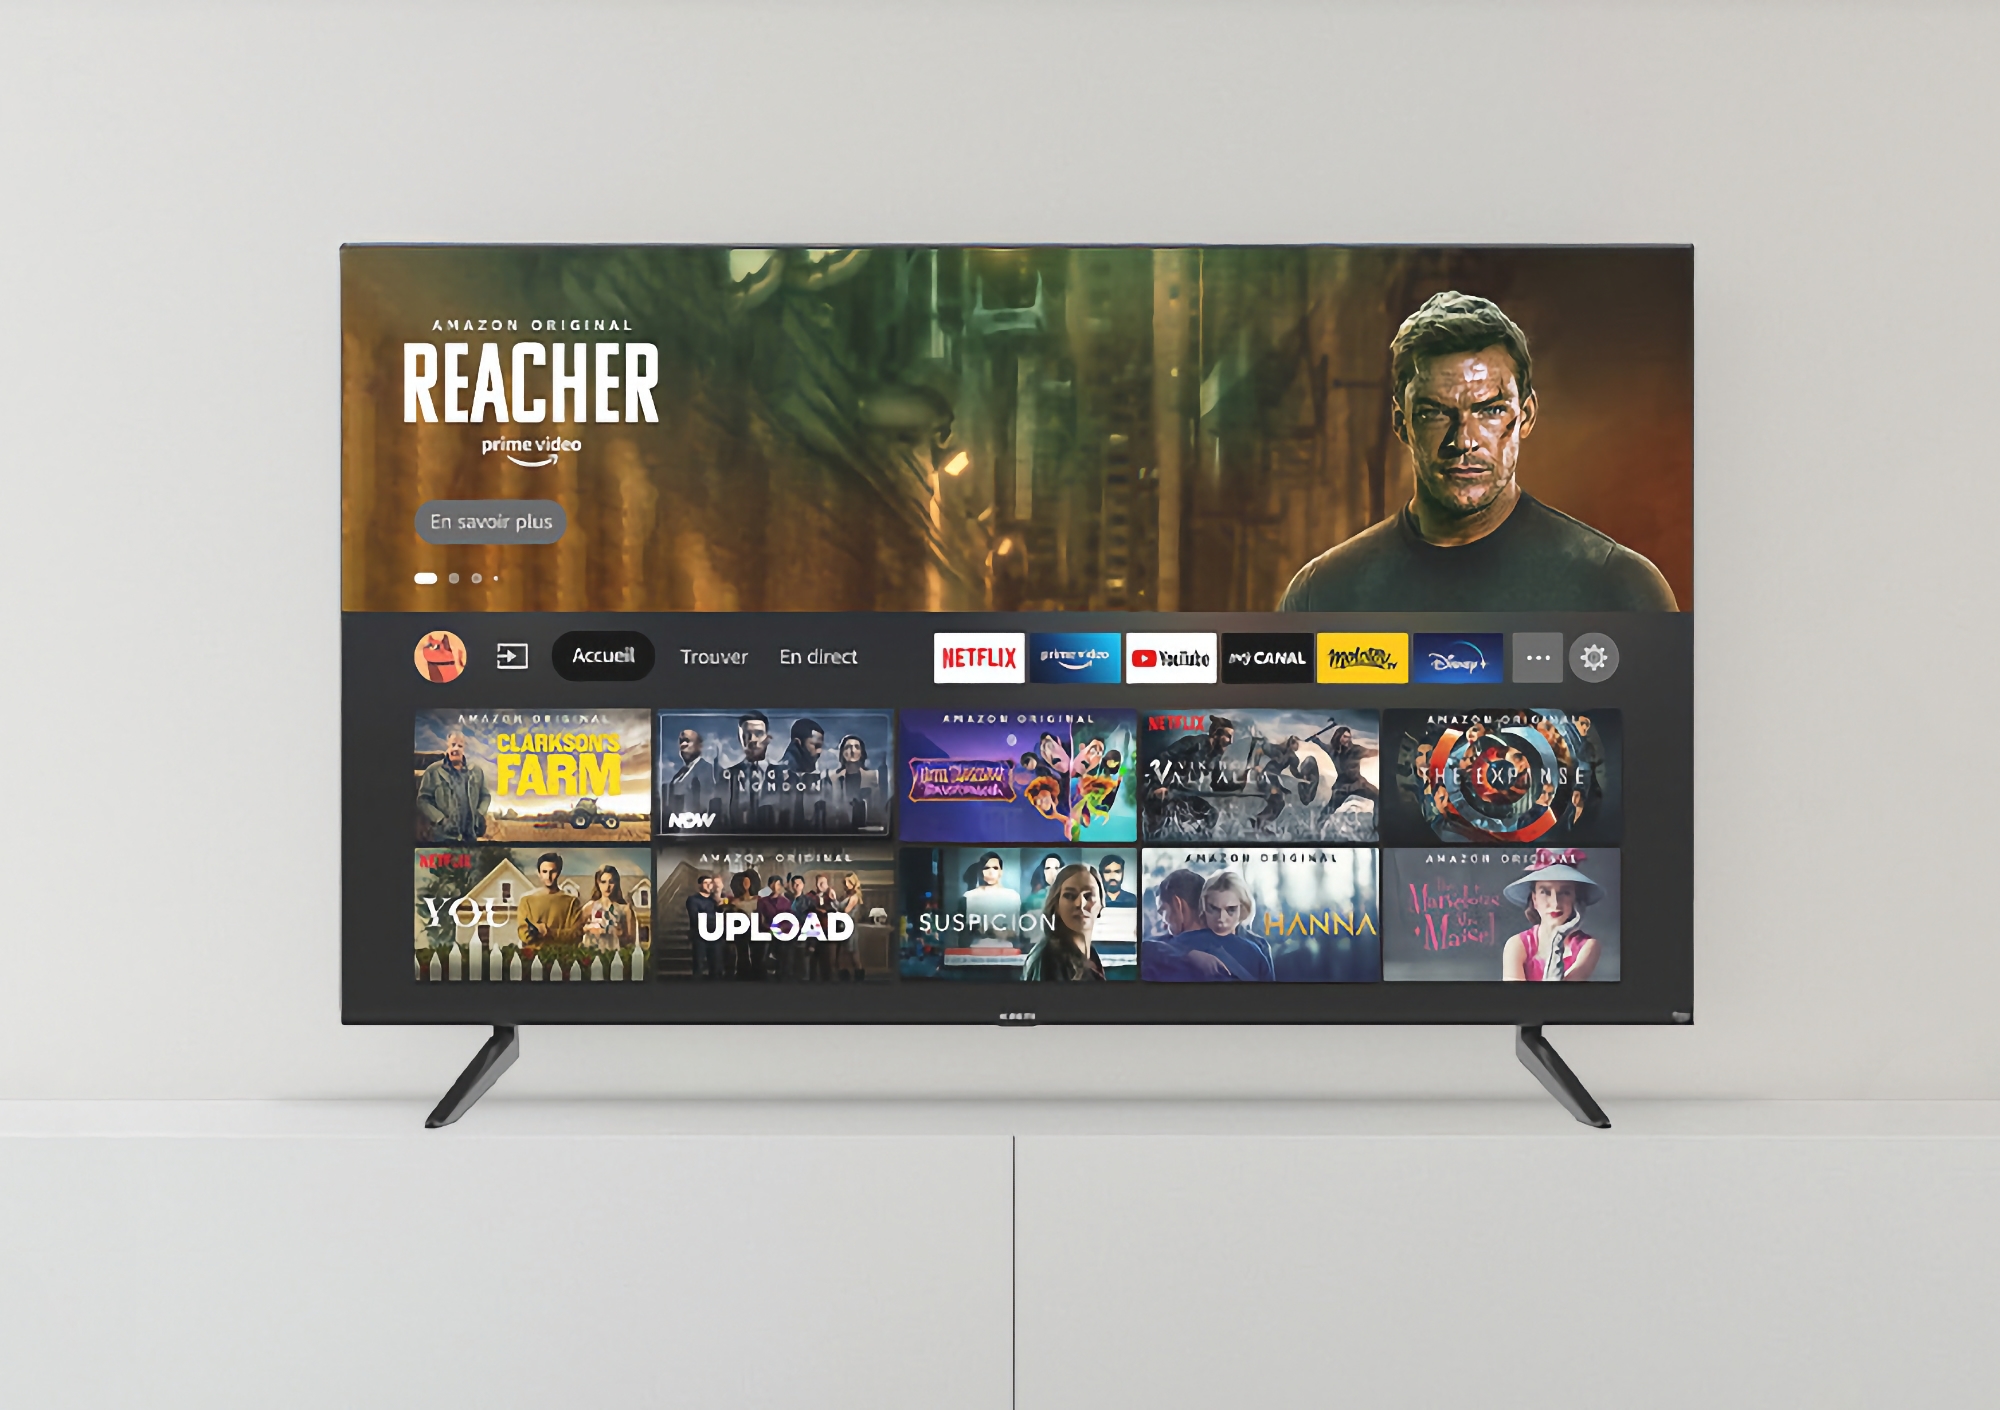 Xiaomi has unveiled a new version of the F2 Fire TV in Europe with a 32-inch screen and AirPlay support